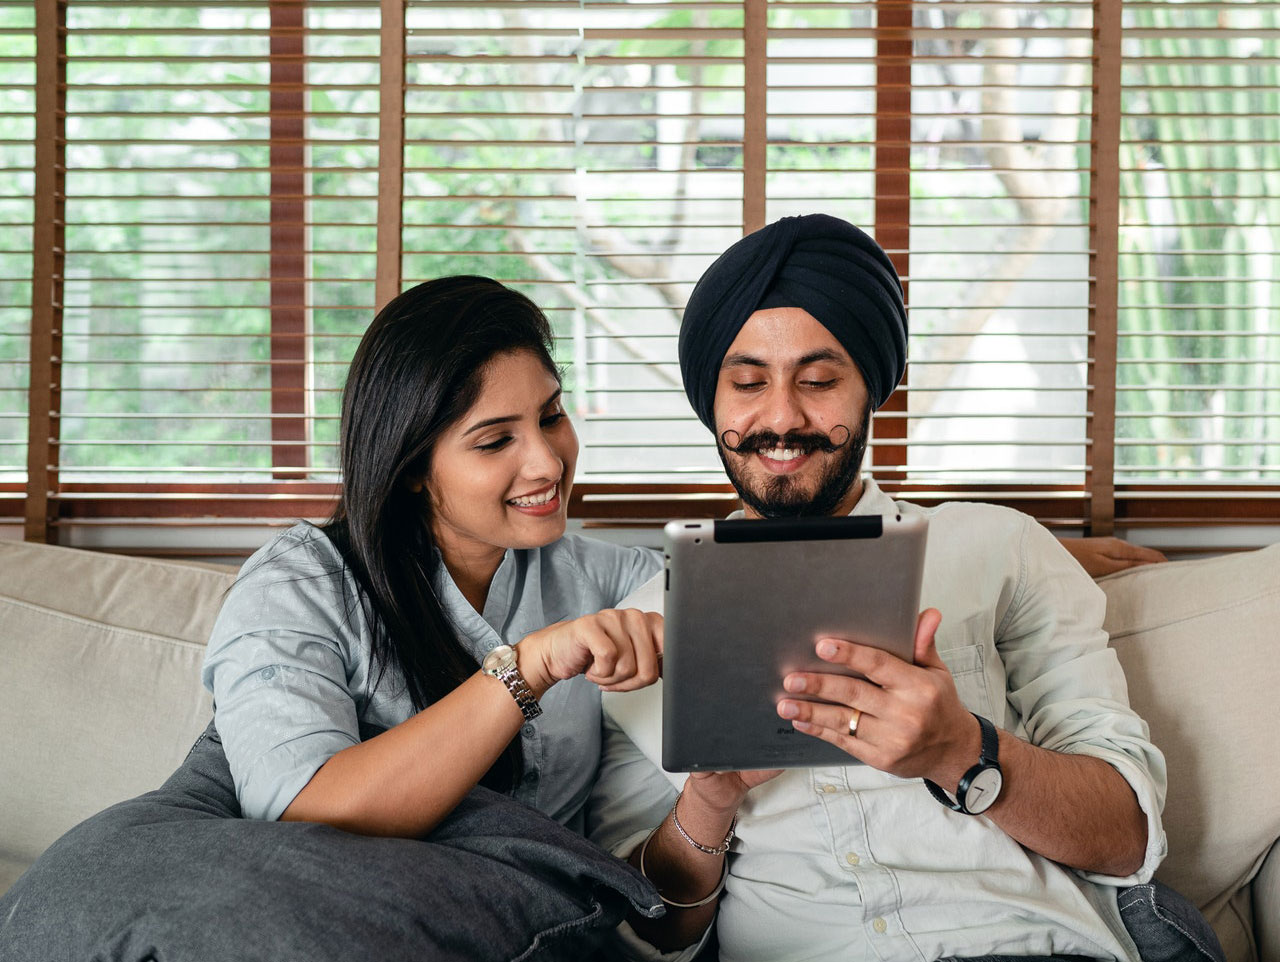 Couple happily using a tablet